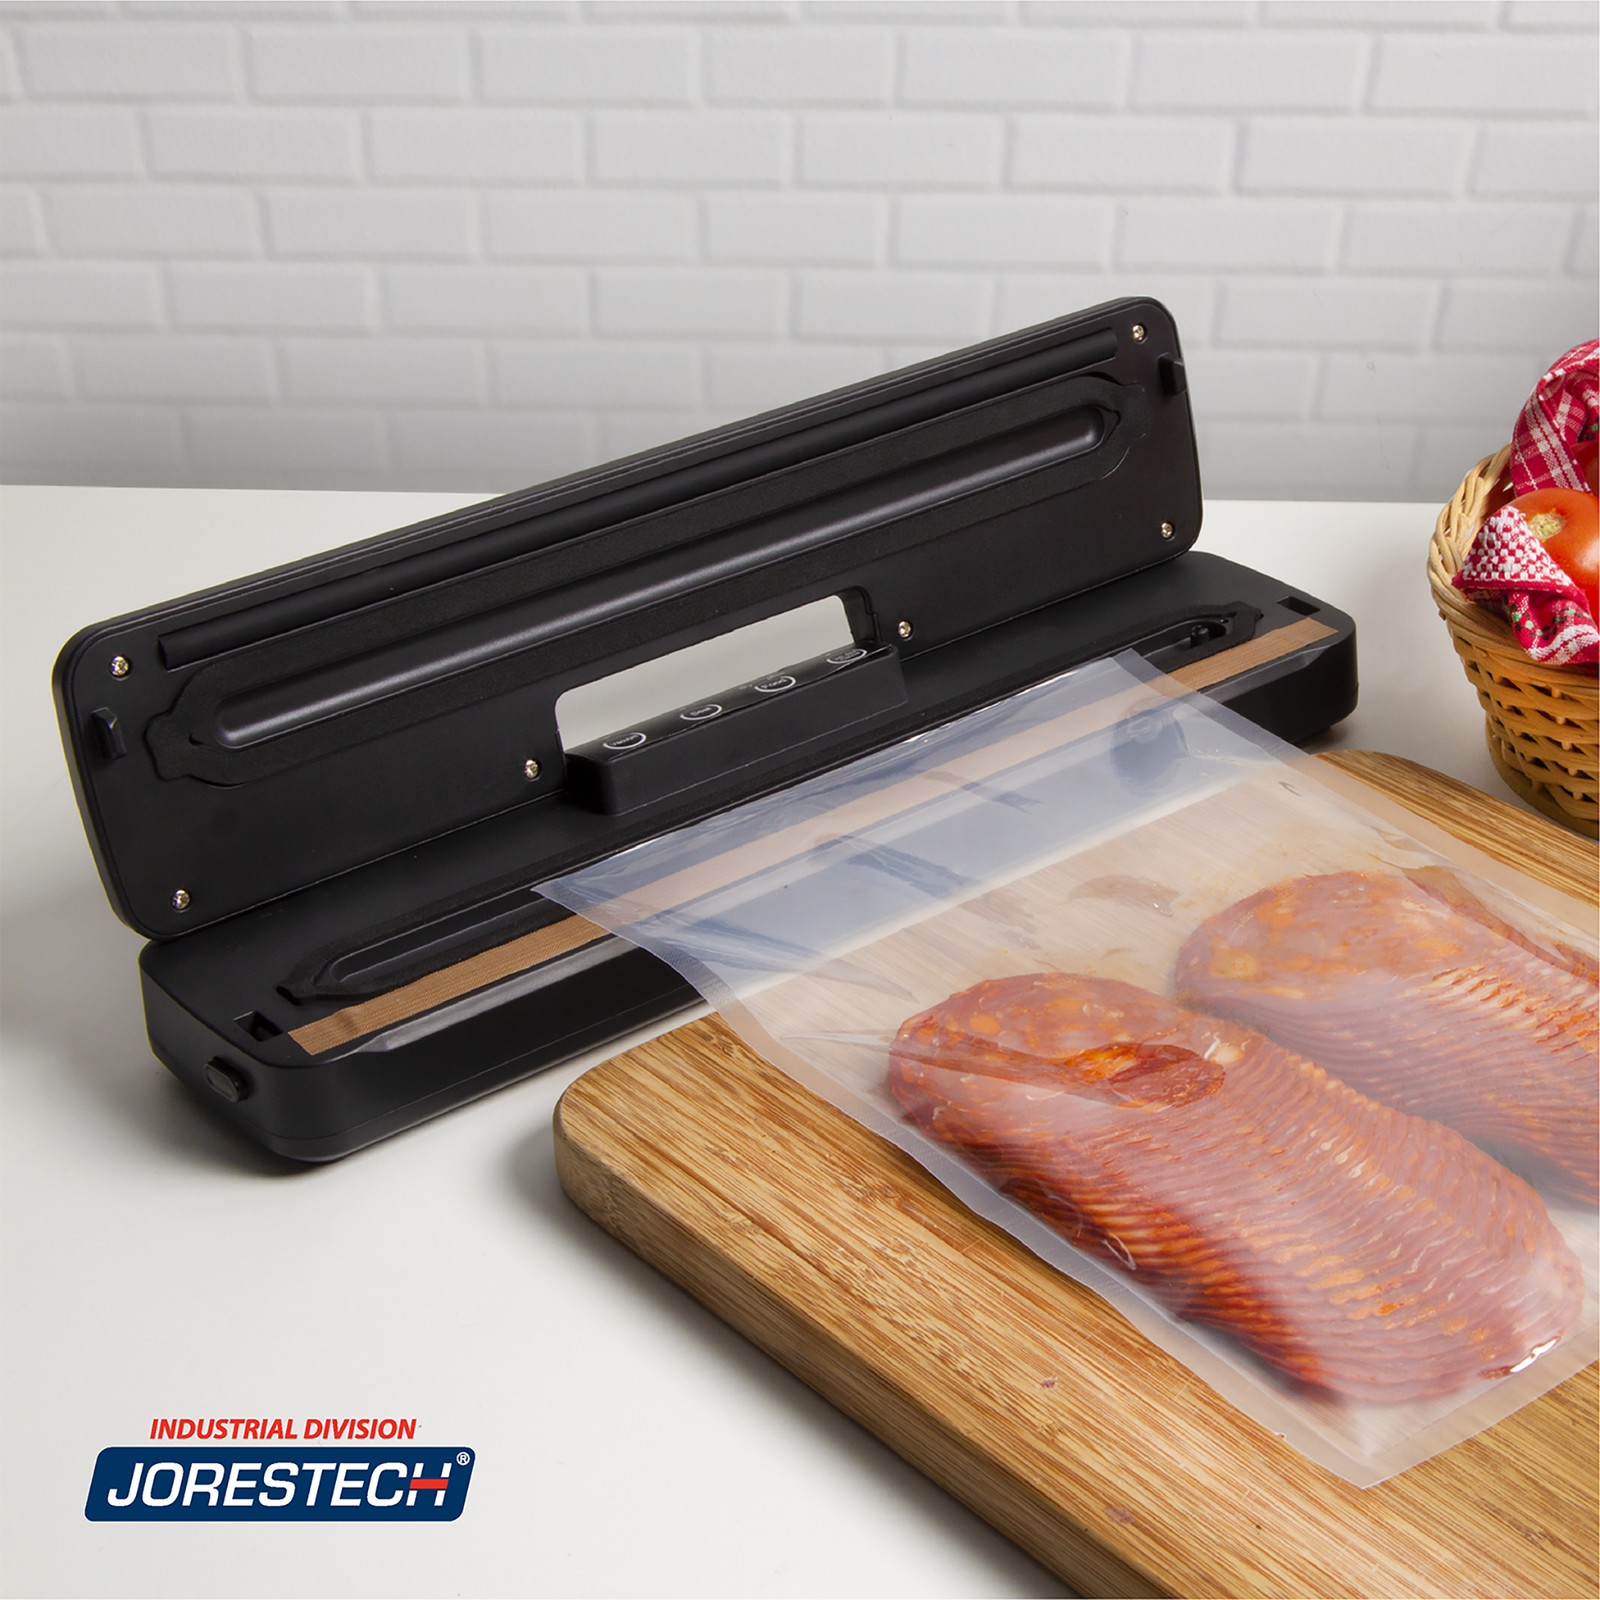 Black JORES TECHNOLOGIES® vacuum sealing machine for home use on a kitchen counter. an embossed vacuum pouch filled with Salamy lays on a wooden board next to the sealing machine, ready to be packaged. 